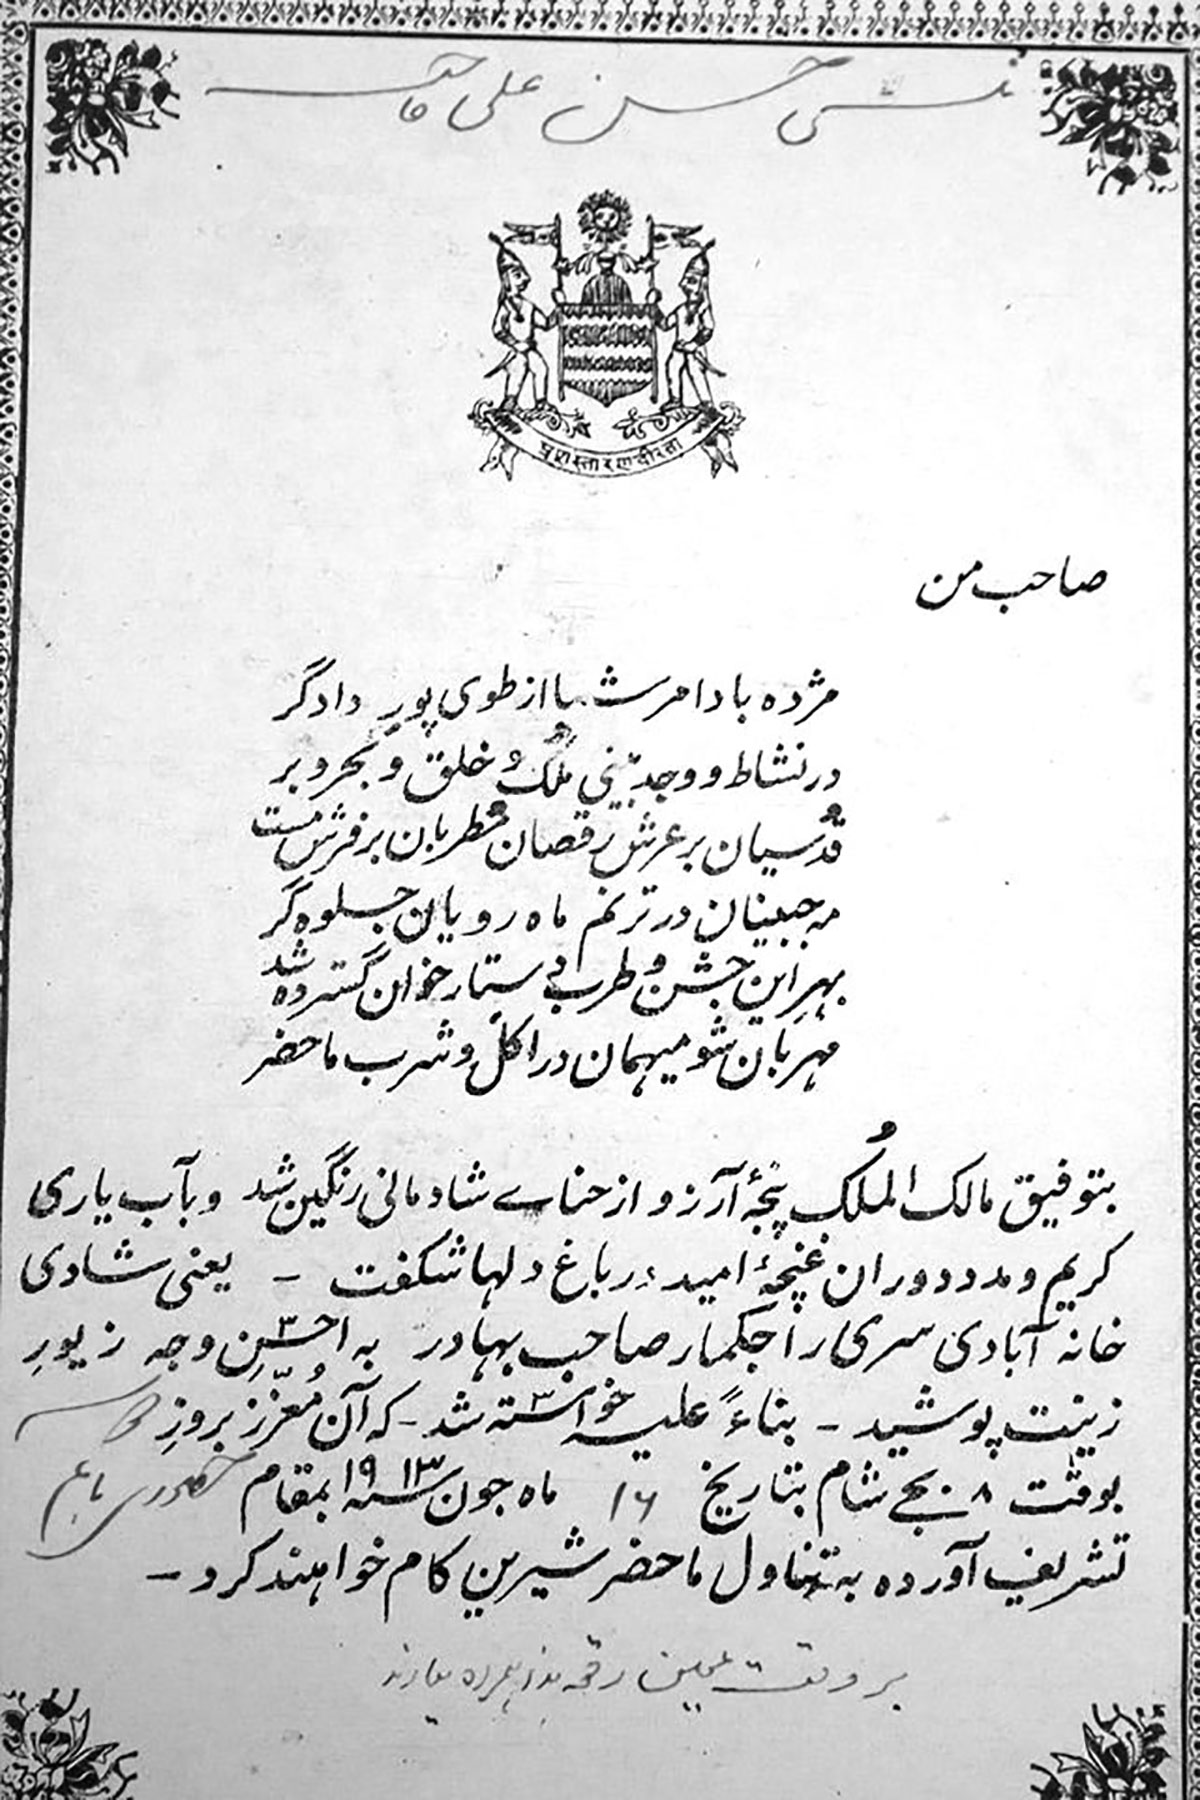 An invitation card in Persian extended to an invitee by the Maharaja’s durbar. Source-social media